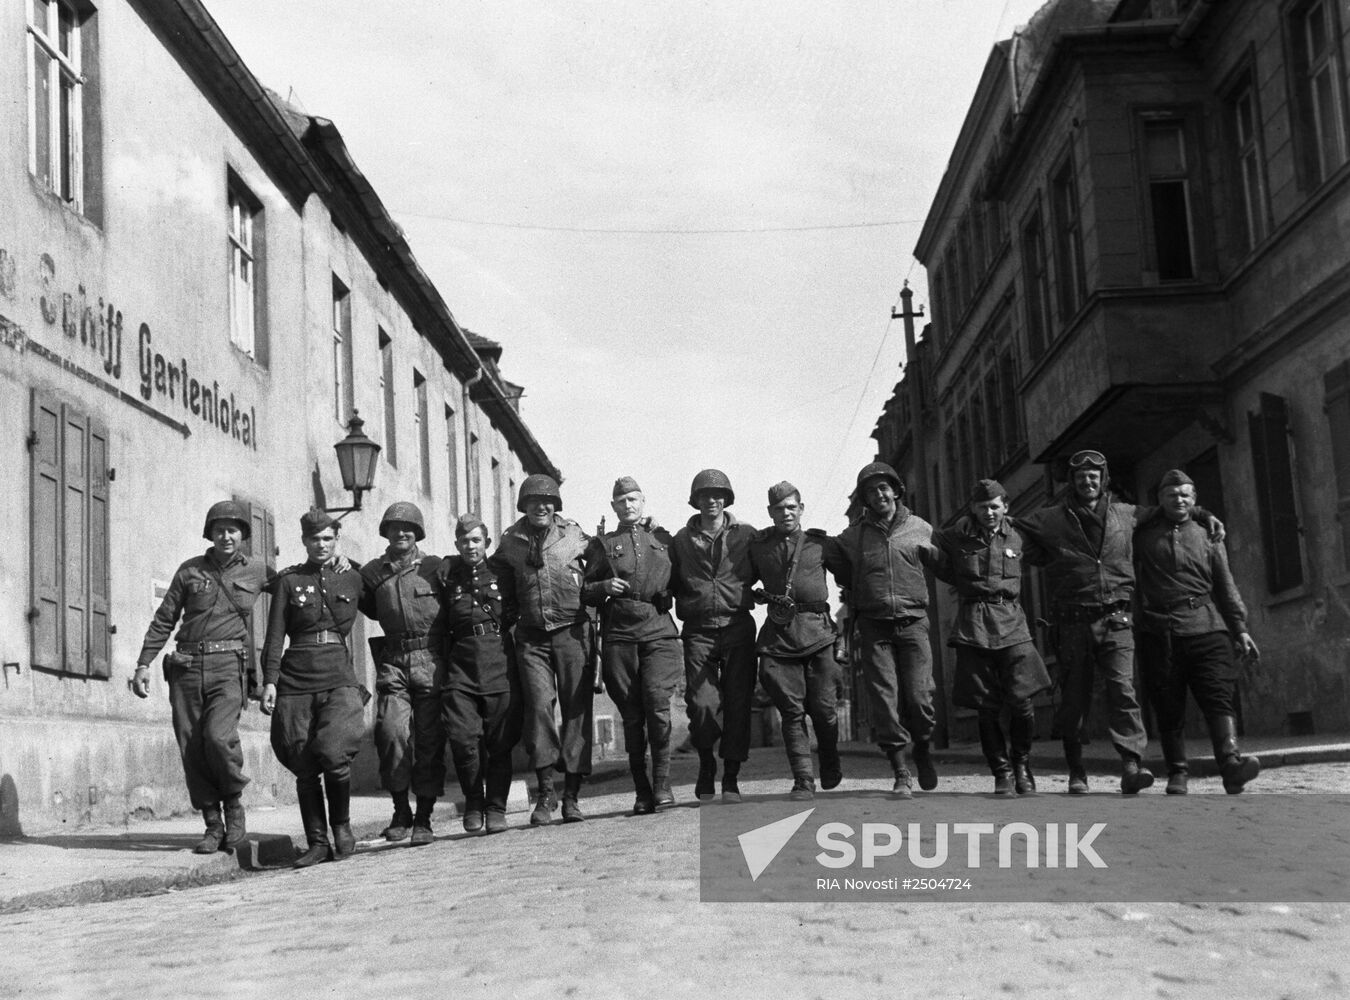 Soviet and American soldiers in Torgau